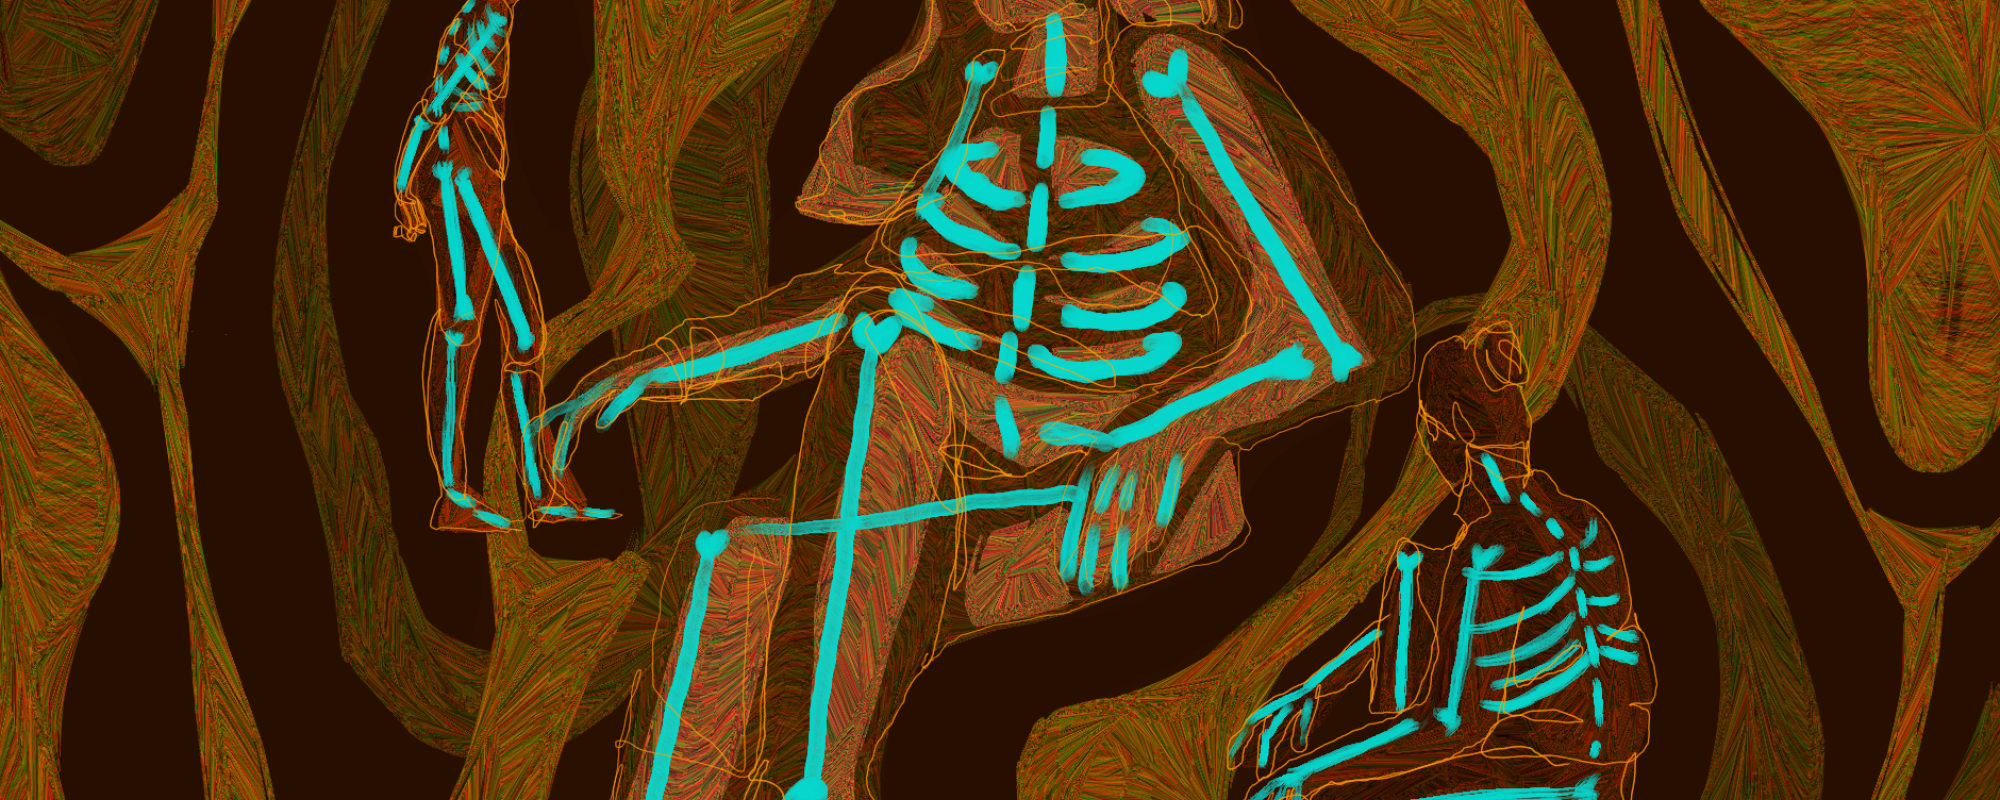 blue human skeletons on a brown and orange background